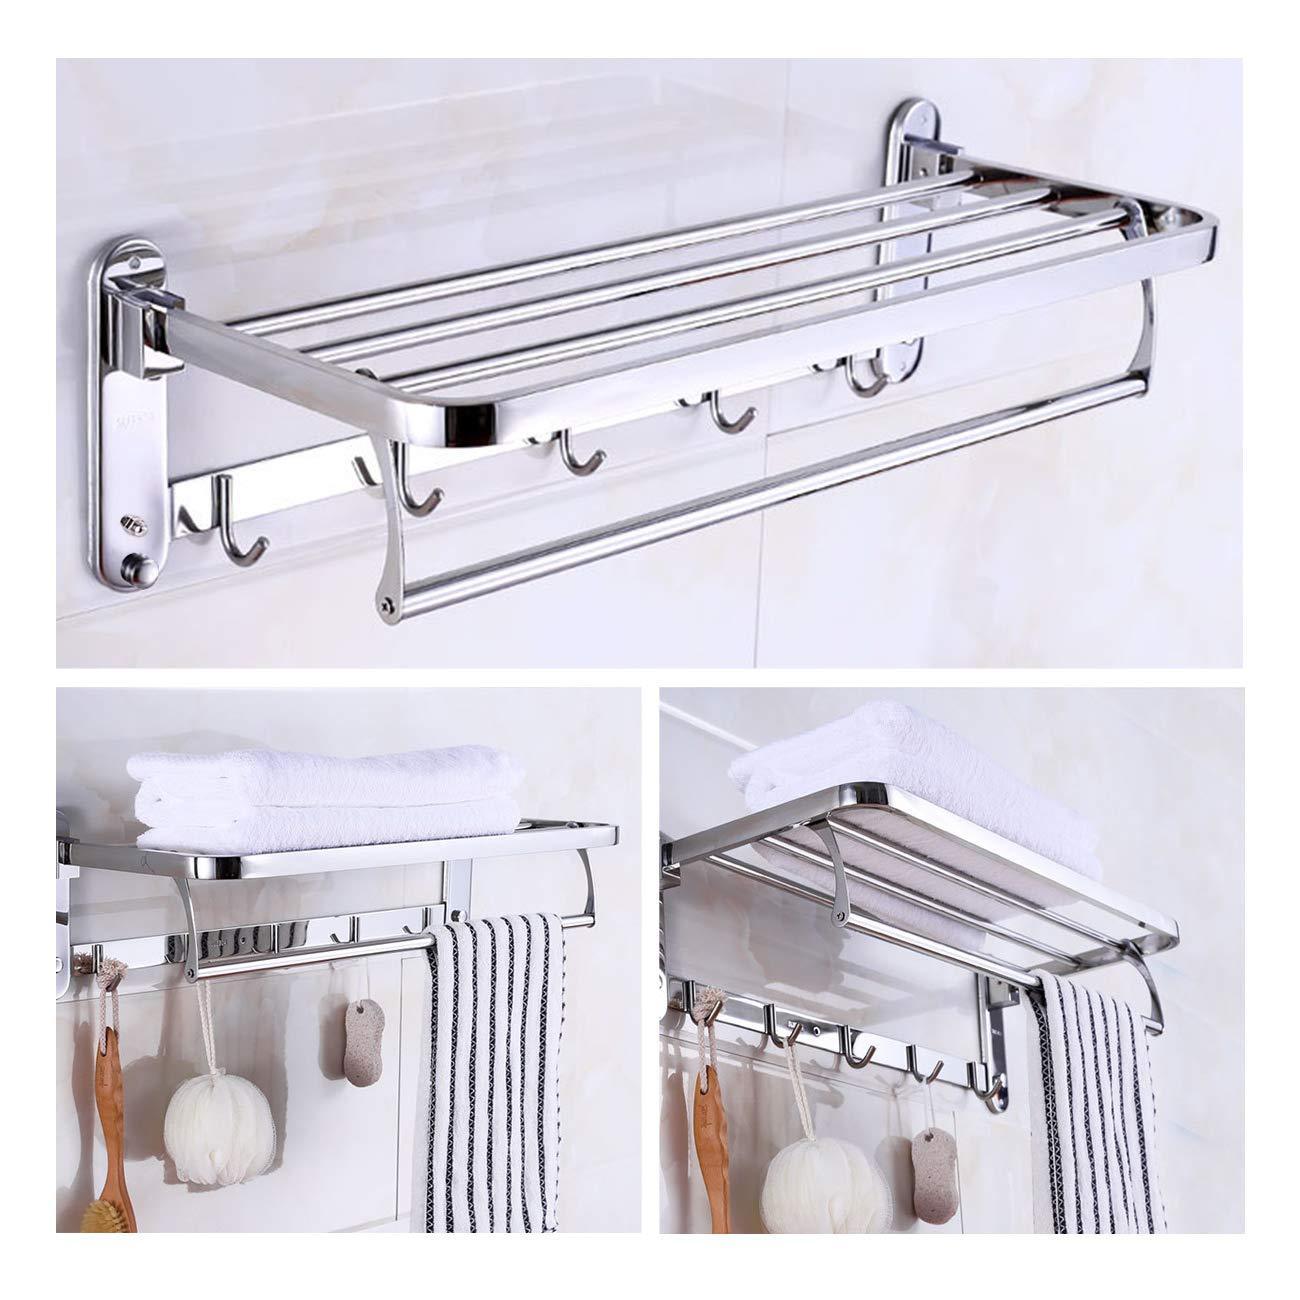 Best beamnova foldable towel rack 20 inch with shelf towel rack with bar hooks wall mounted easy installation towel holder stainless steel for shower bathroom kitchen